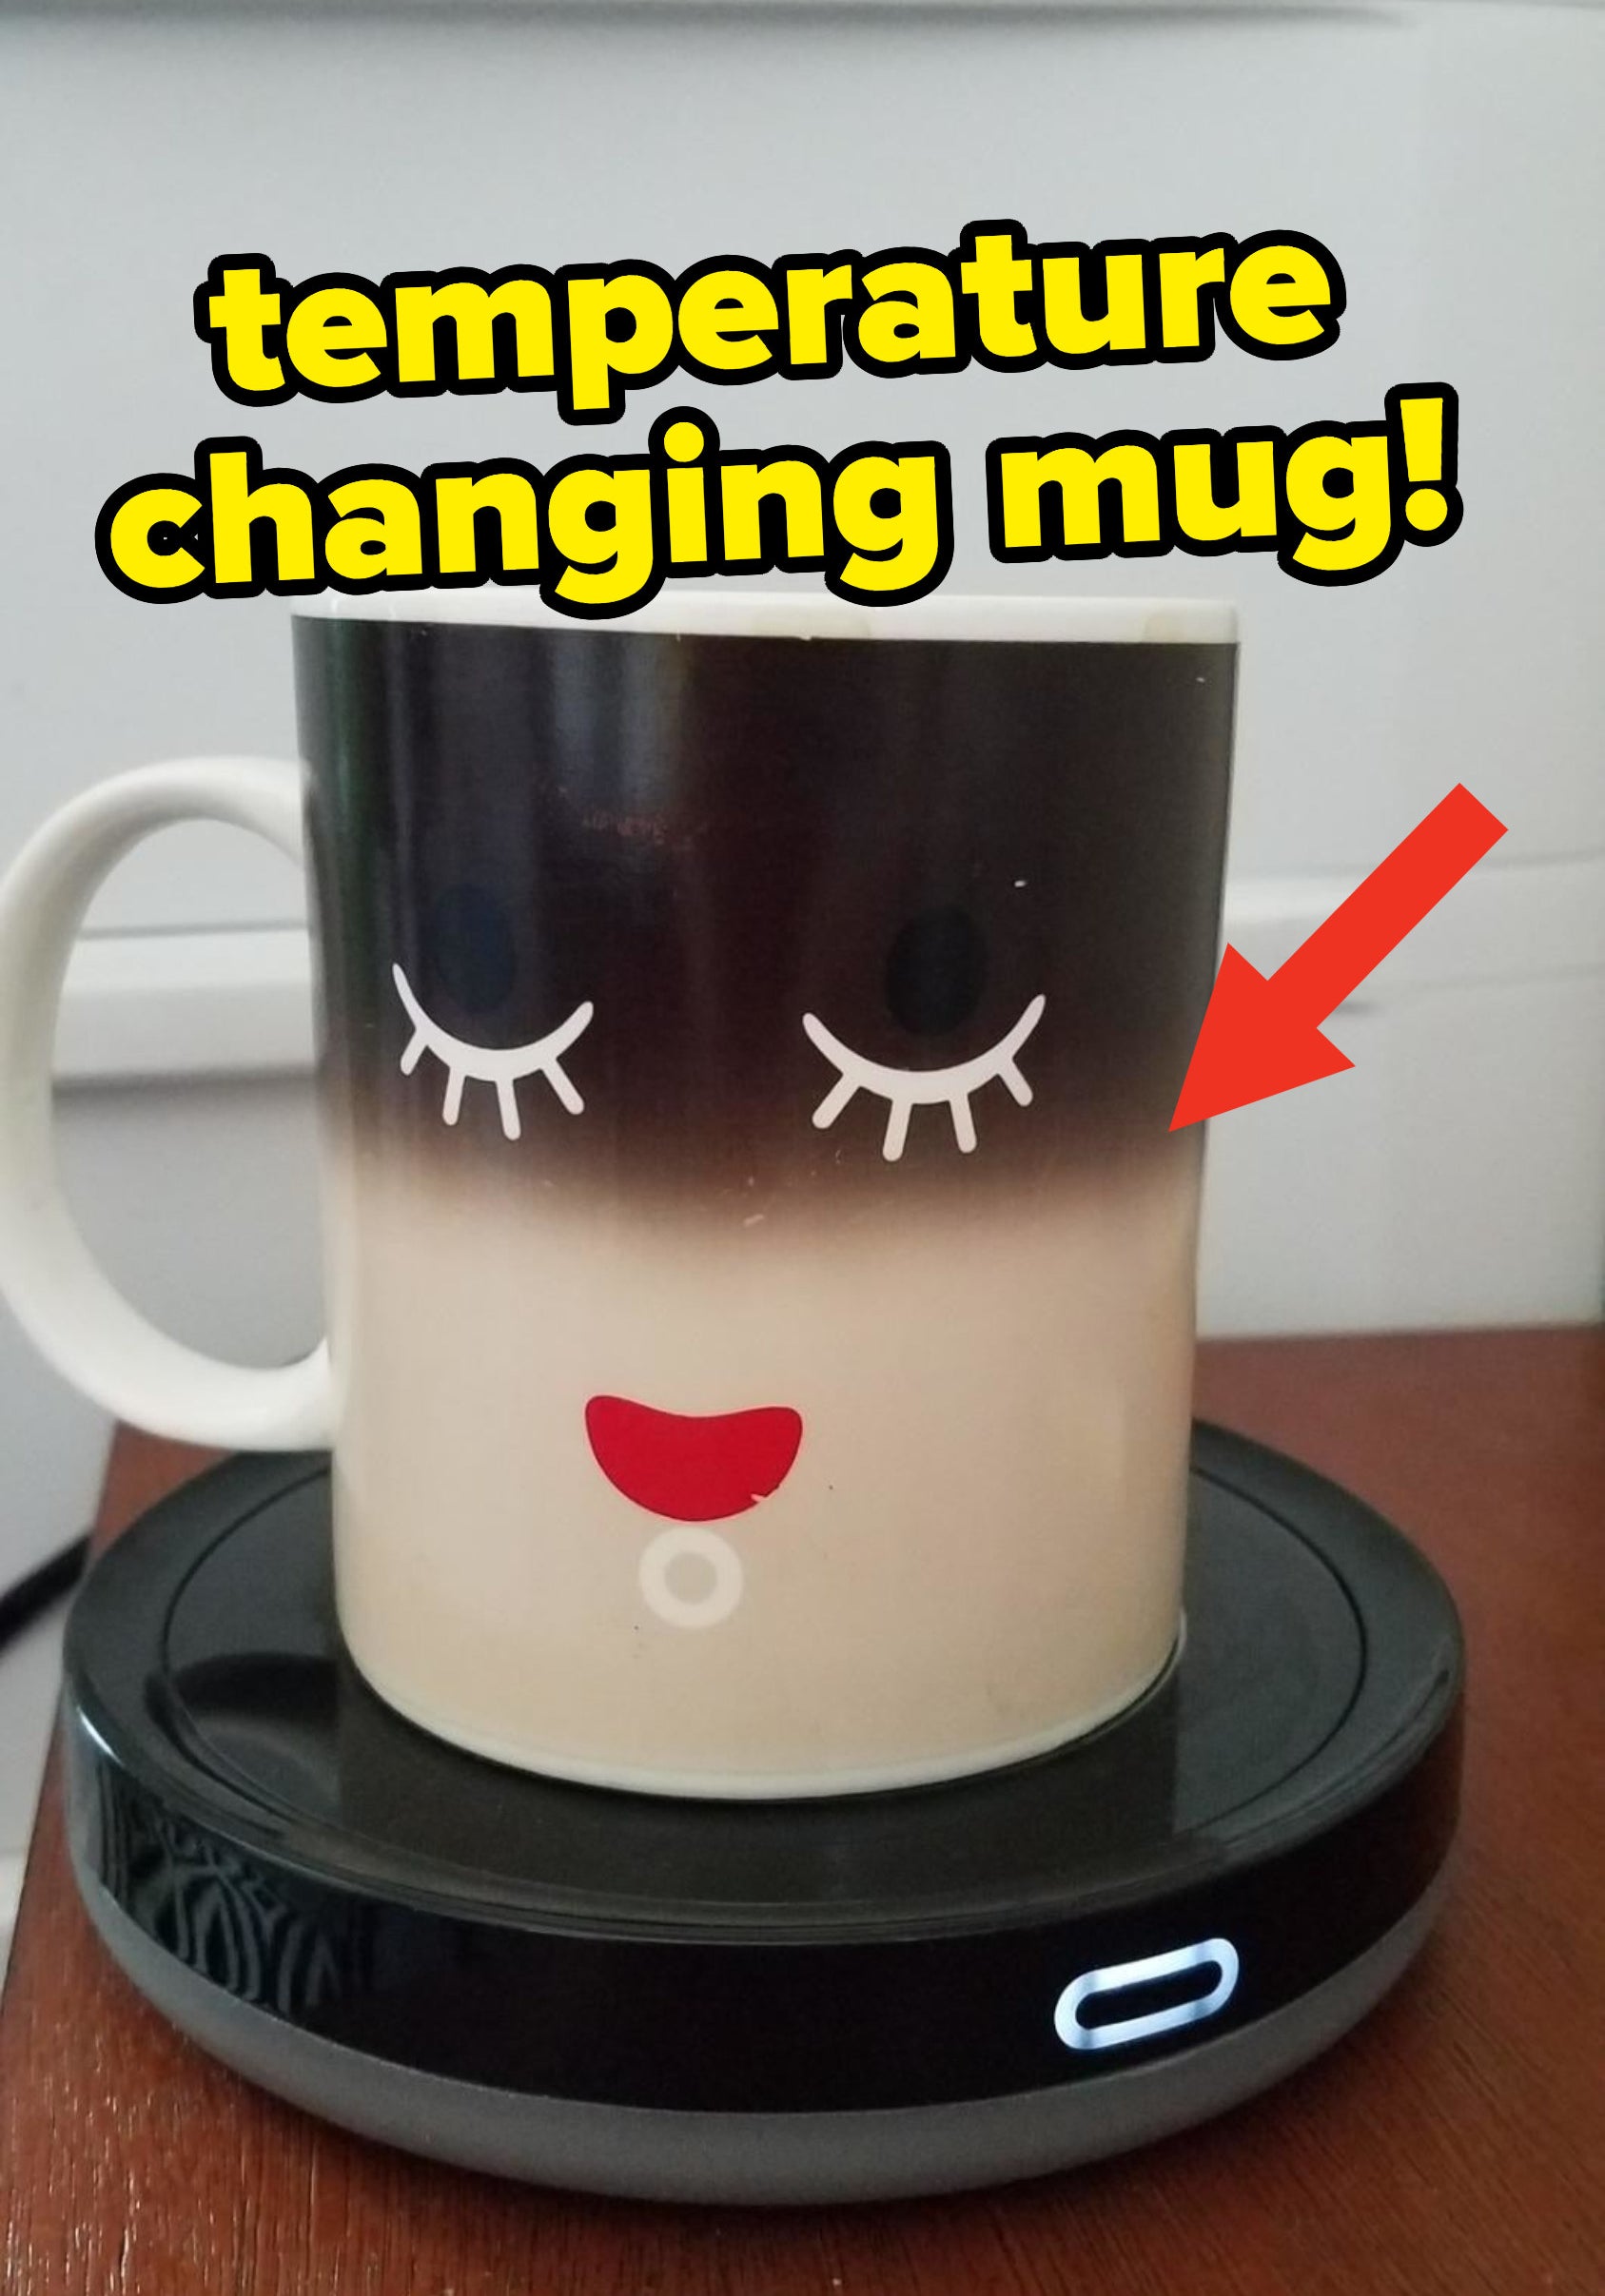 A temperature changing mug on top of a mug warmer, showing that the coffee inside is warm based on the color change